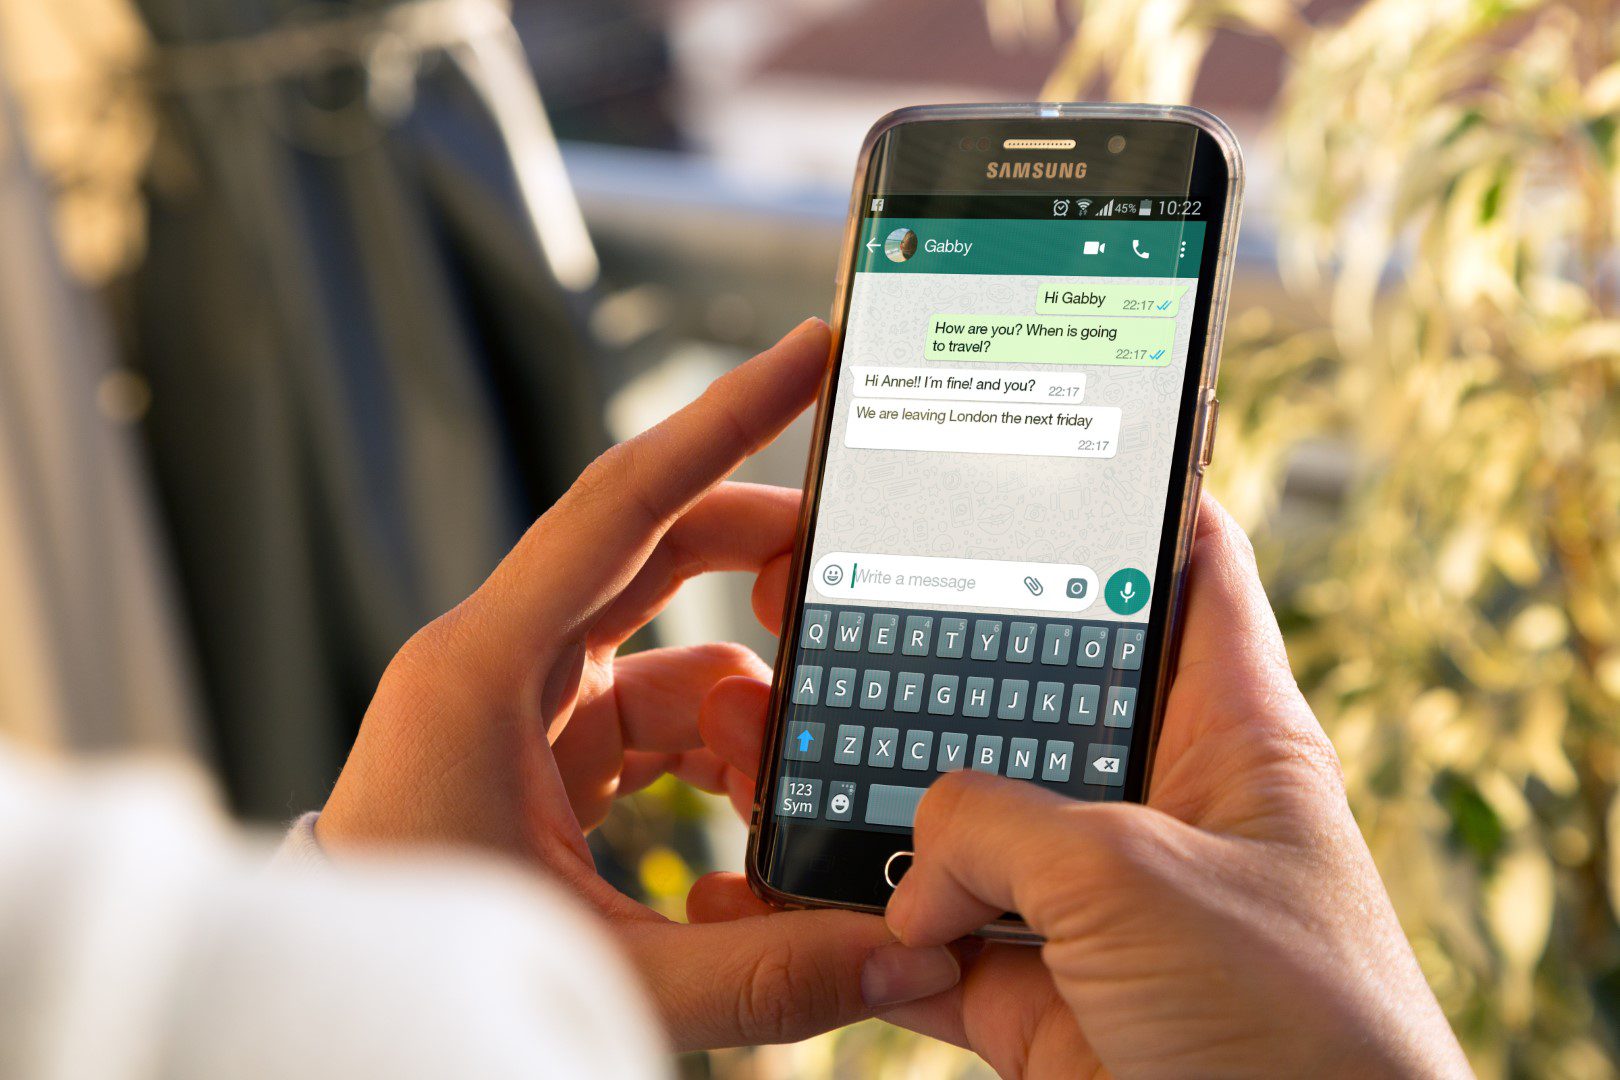 WhatsApp adds new features for text formatting